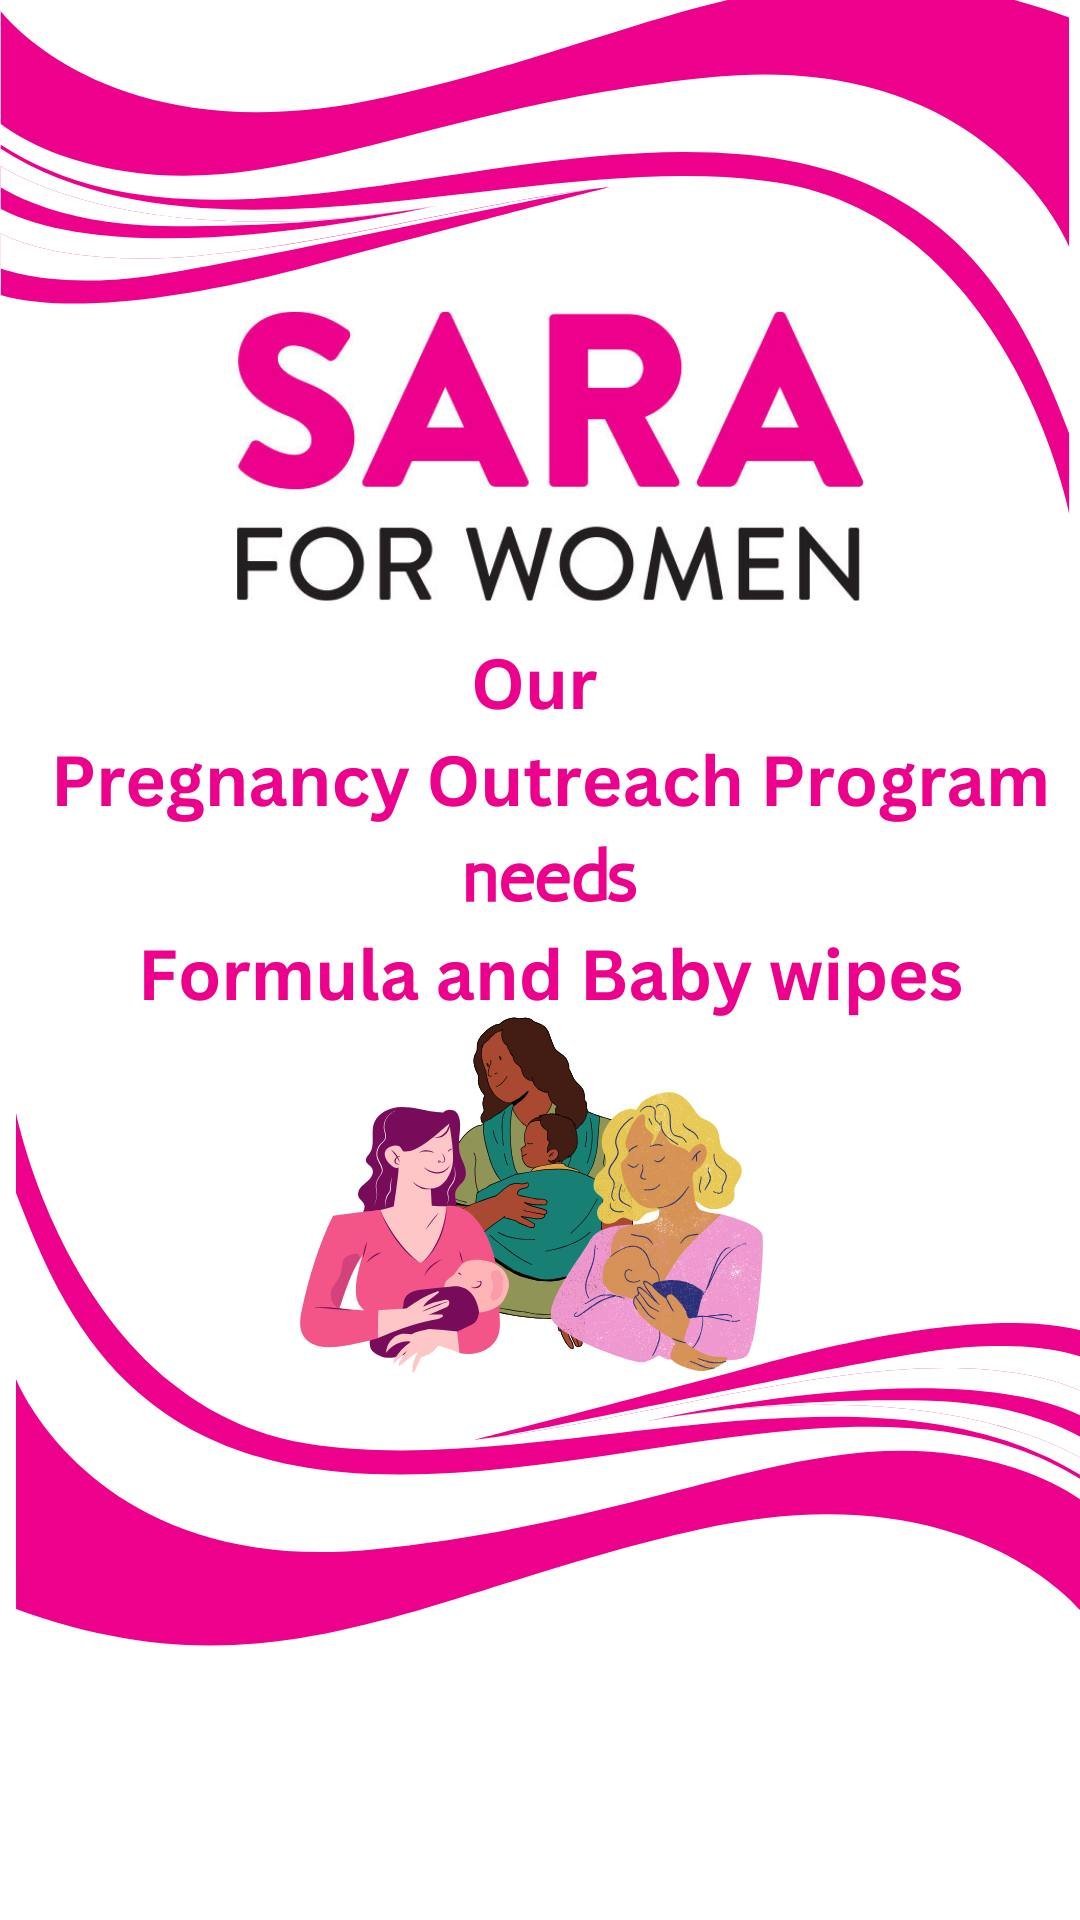 SARA for Women is actively seeking donations of formula and wipes to help support our Pregnancy Outreach Program. Your contribution would make a significant difference in the lives of many women and their families. We are grateful for any support you